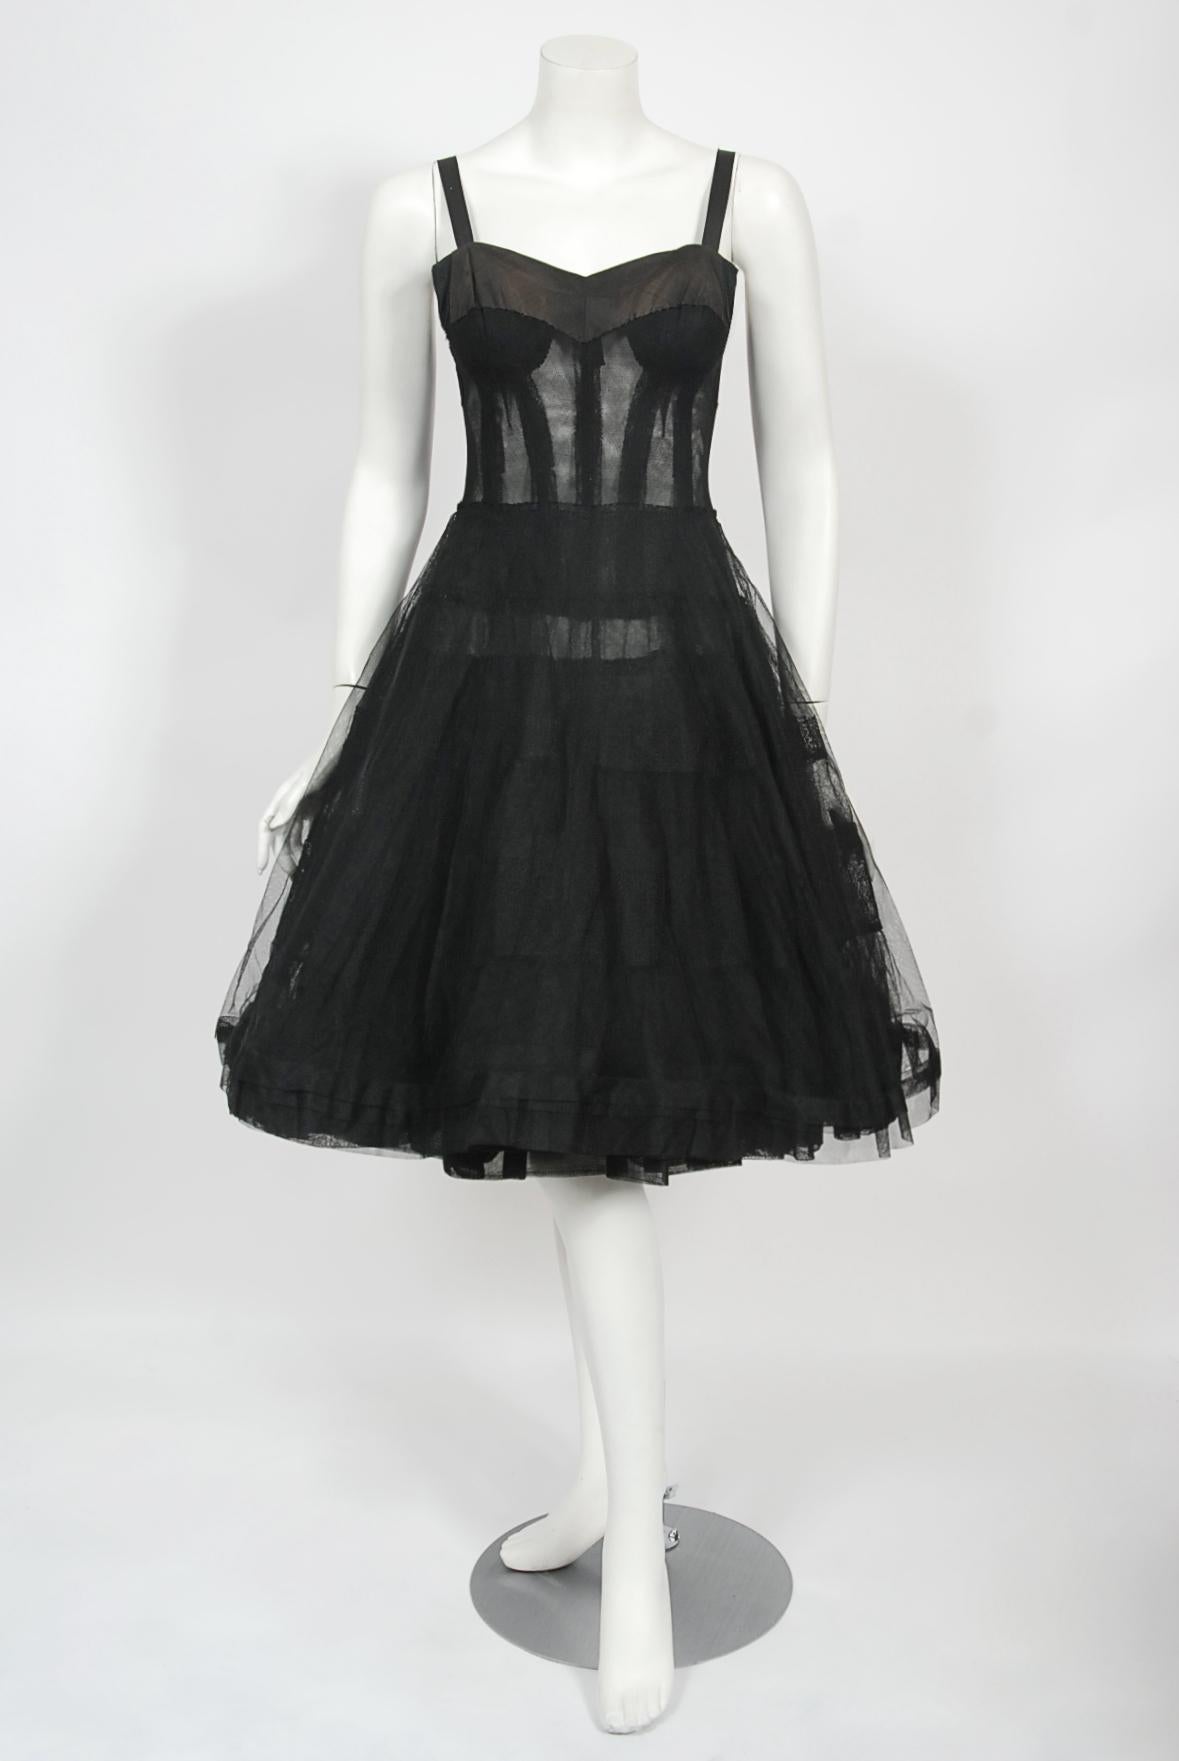 Vintage 1956 Christian Dior Haute Couture Documented Black Silk 'New Look' Dress 6